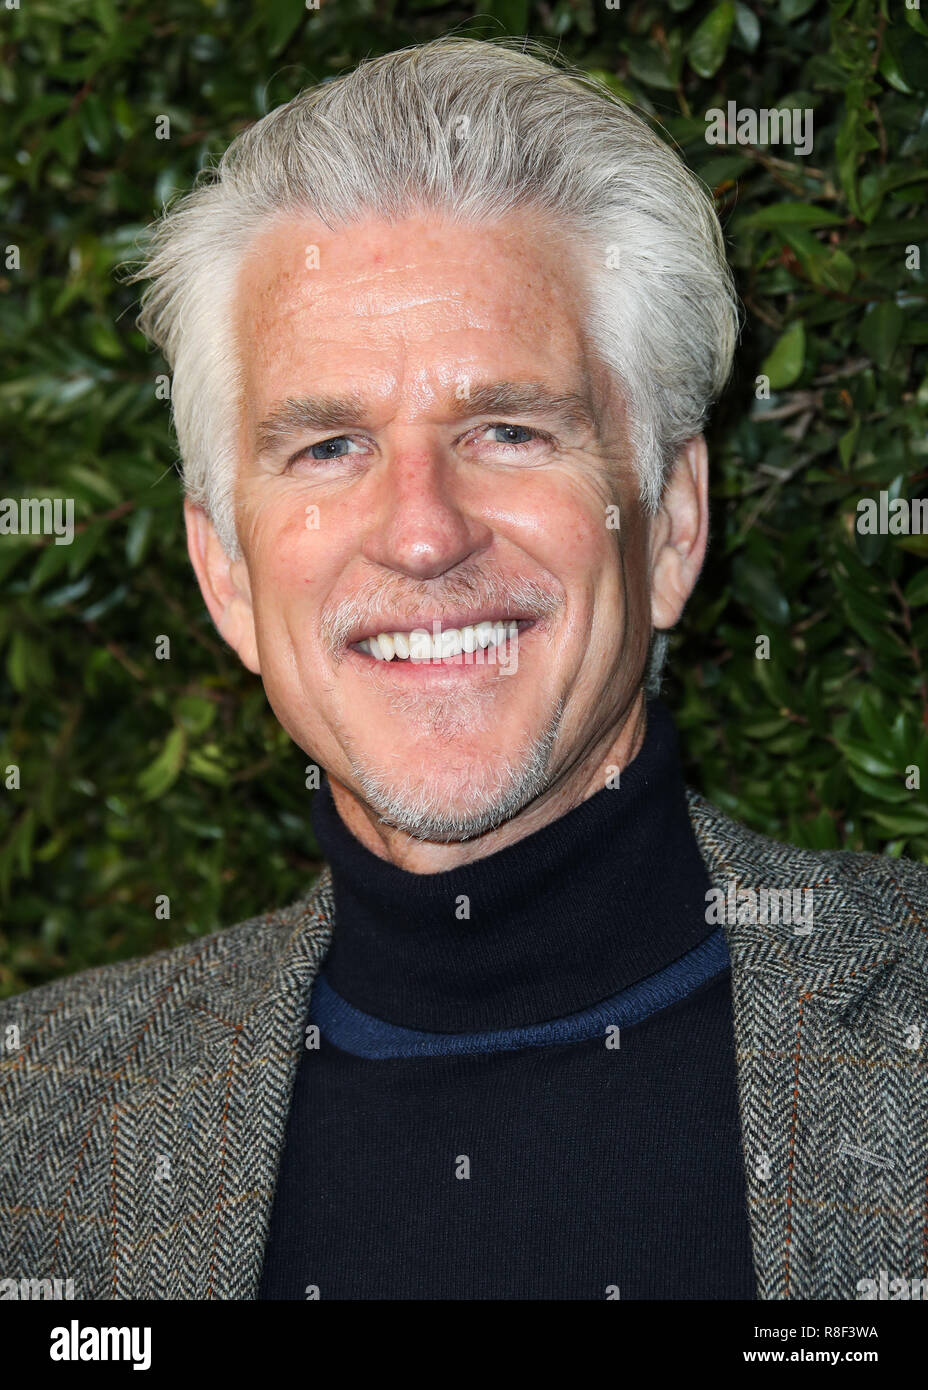 BEVERLY HILLS, LOS ANGELES, CA, USA - MARCH 03: Matthew Modine at the Chanel And Charles Finch Pre-Oscar Awards Dinner 2018 held at Madeo Restaurant on March 3, 2018 in Beverly Hills, Los Angeles, California, United States. (Photo by Xavier Collin/Image Press Agency) Stock Photo